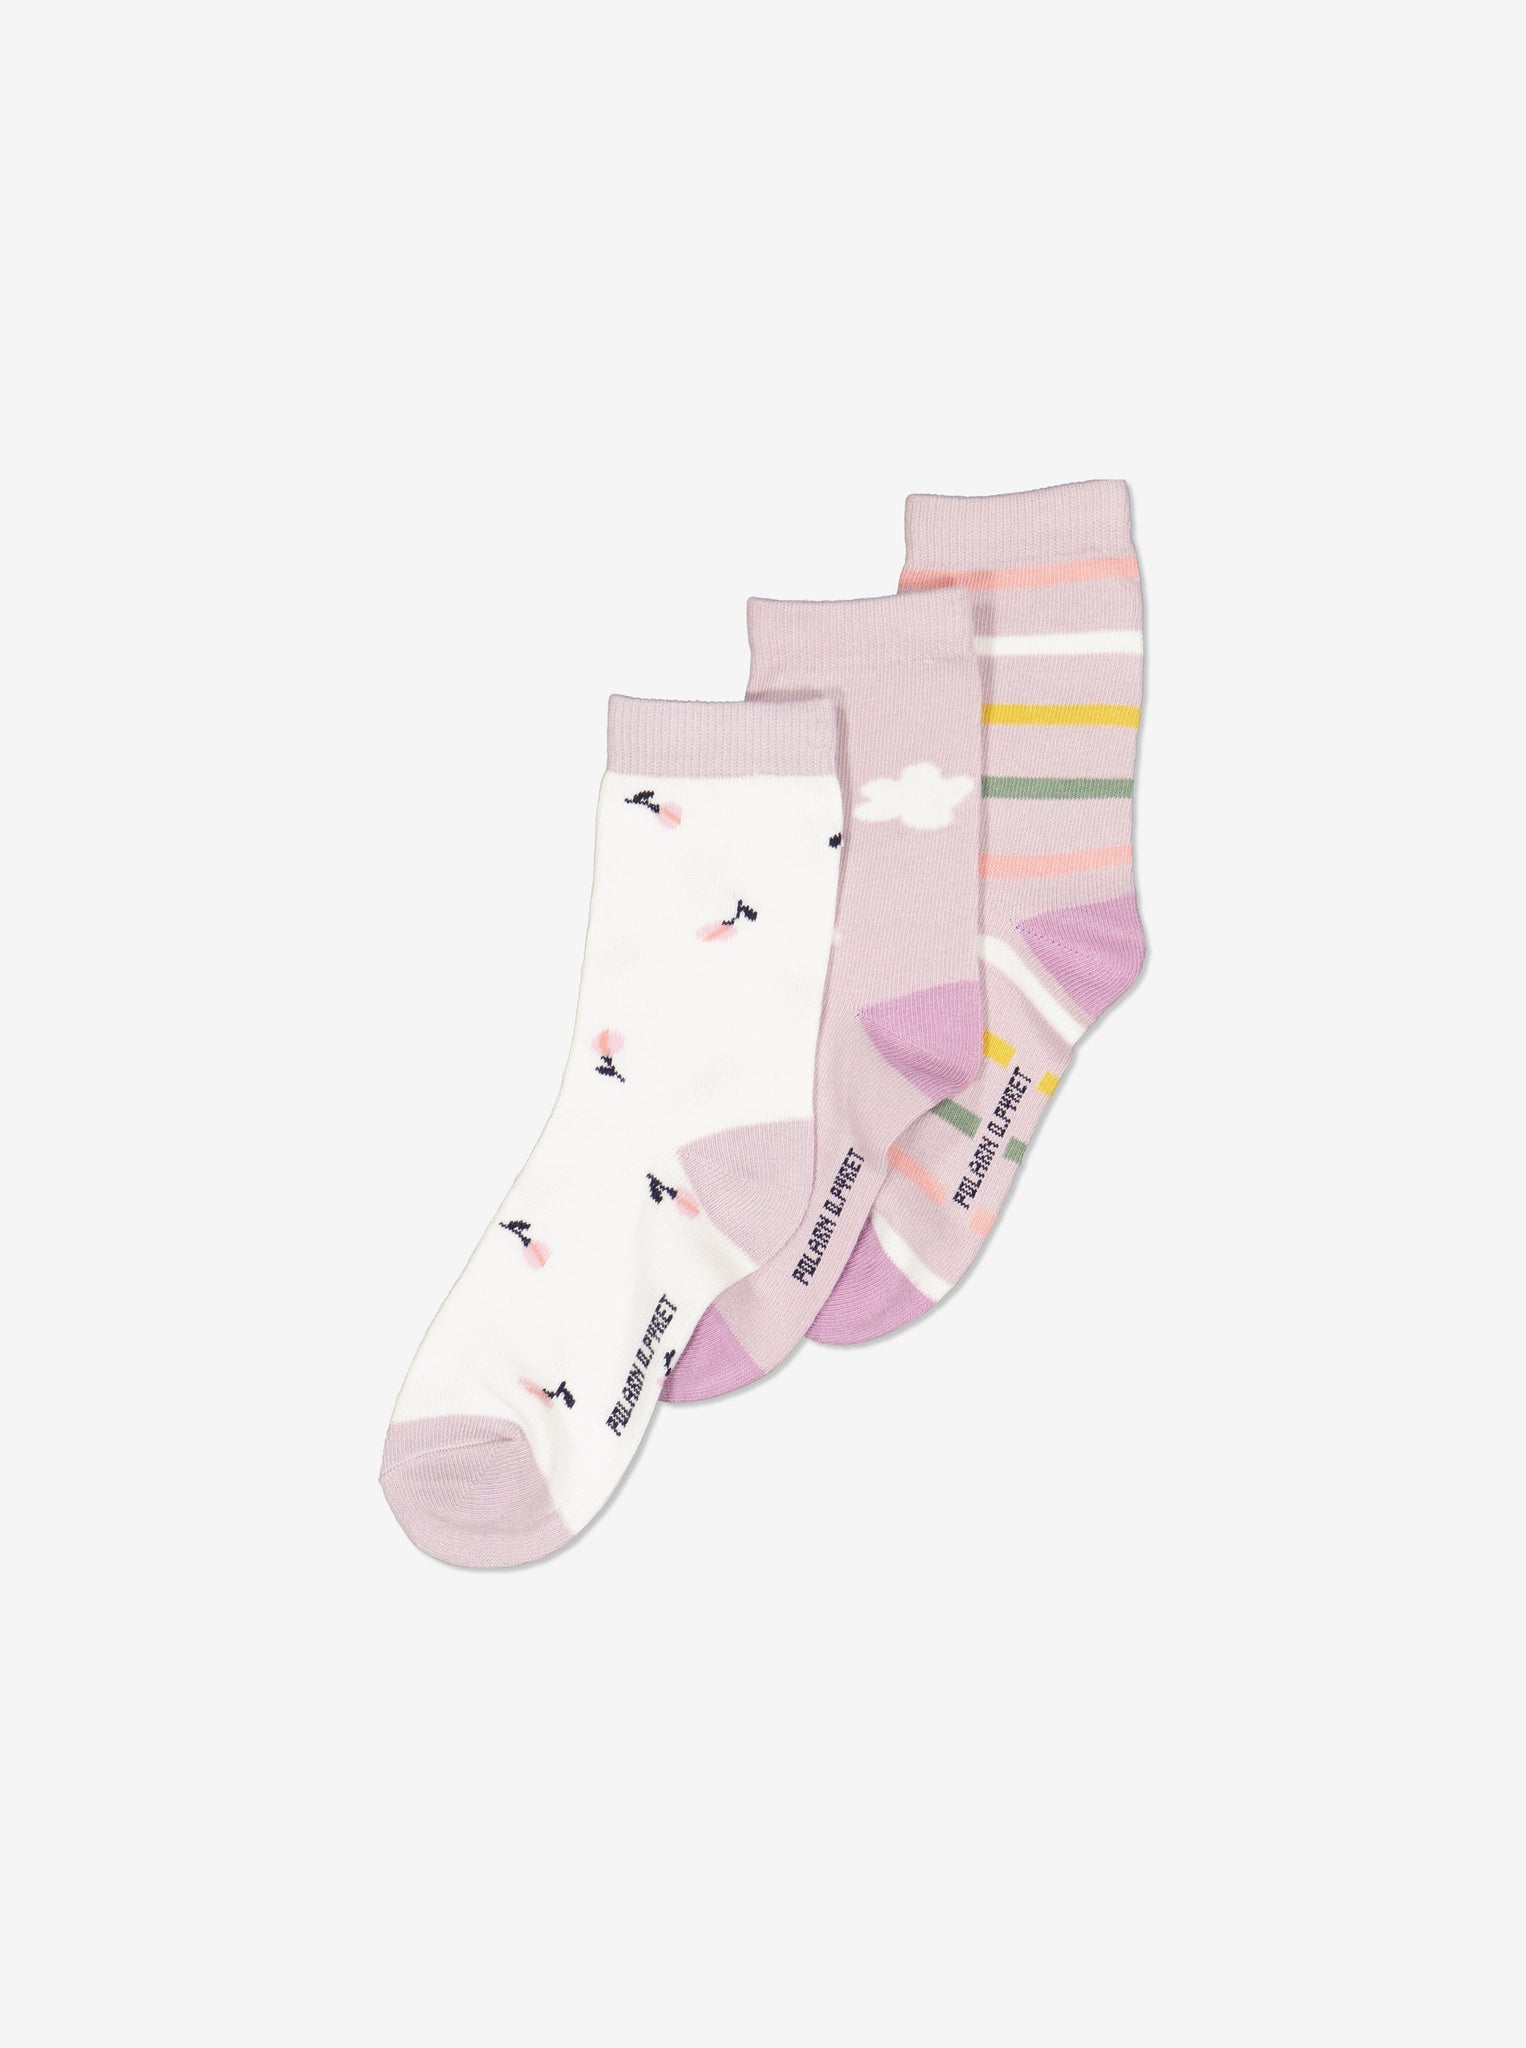  Organic Cotton Pink Kids Socks Multipack from Polarn O. Pyret Kidswear. Made from environmentally friendly materials.